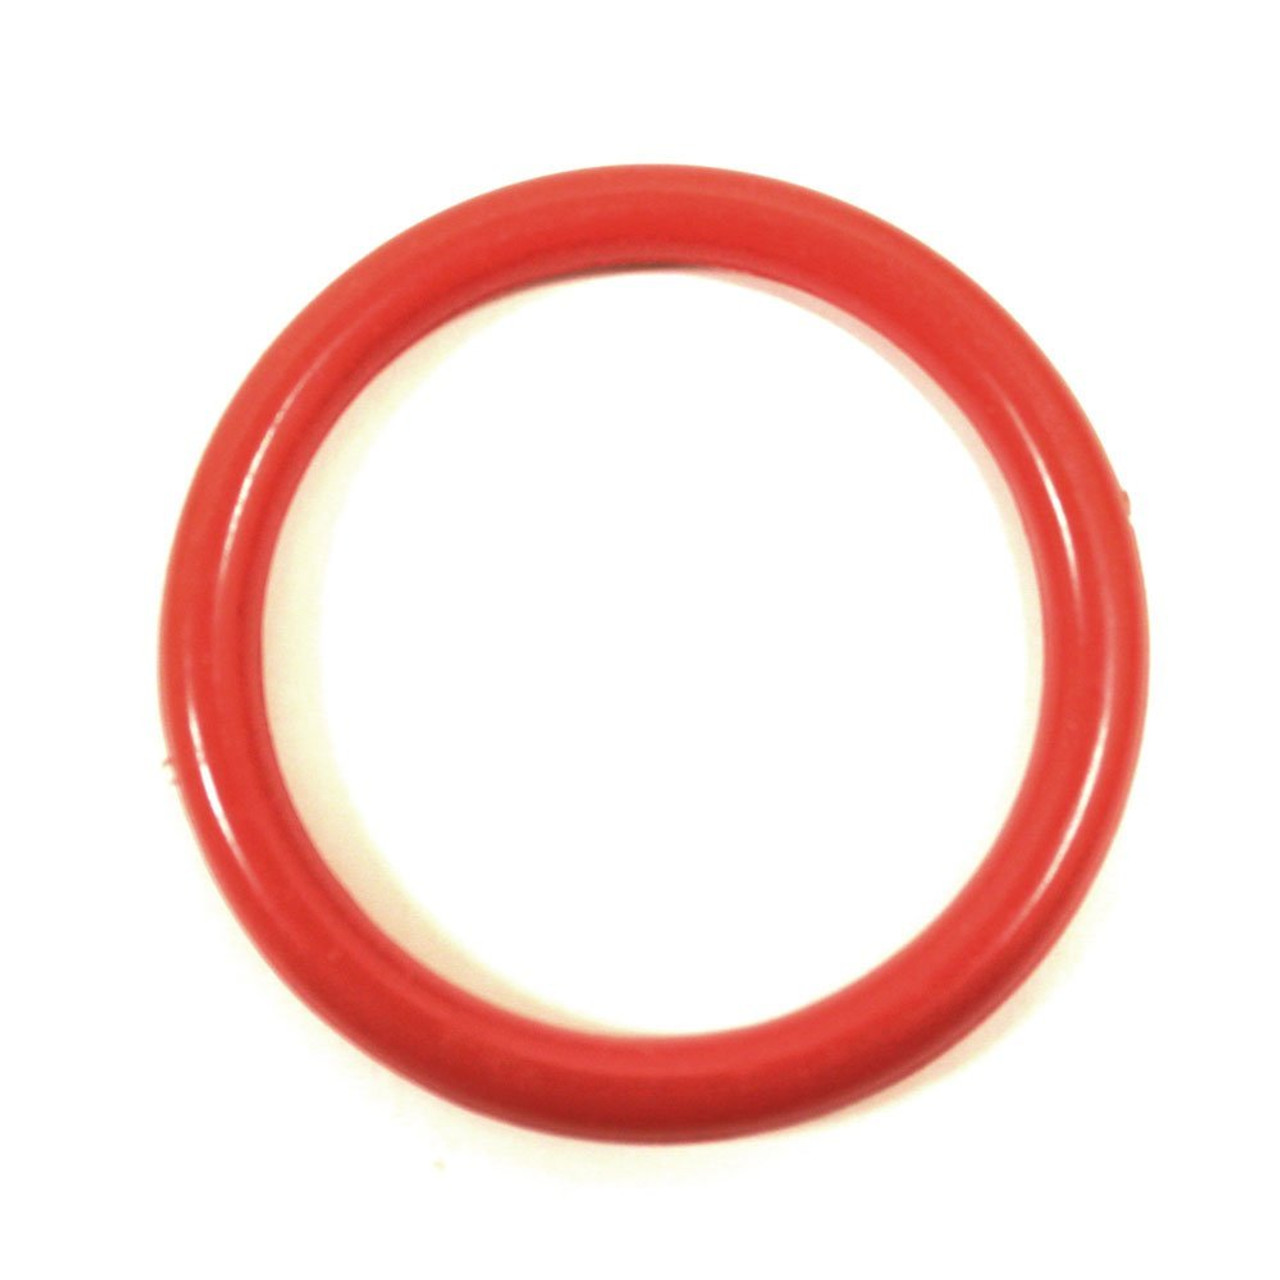 12 Pack Small Ring Toss Rings with 2.125 in Diameter - Hobby Monsters